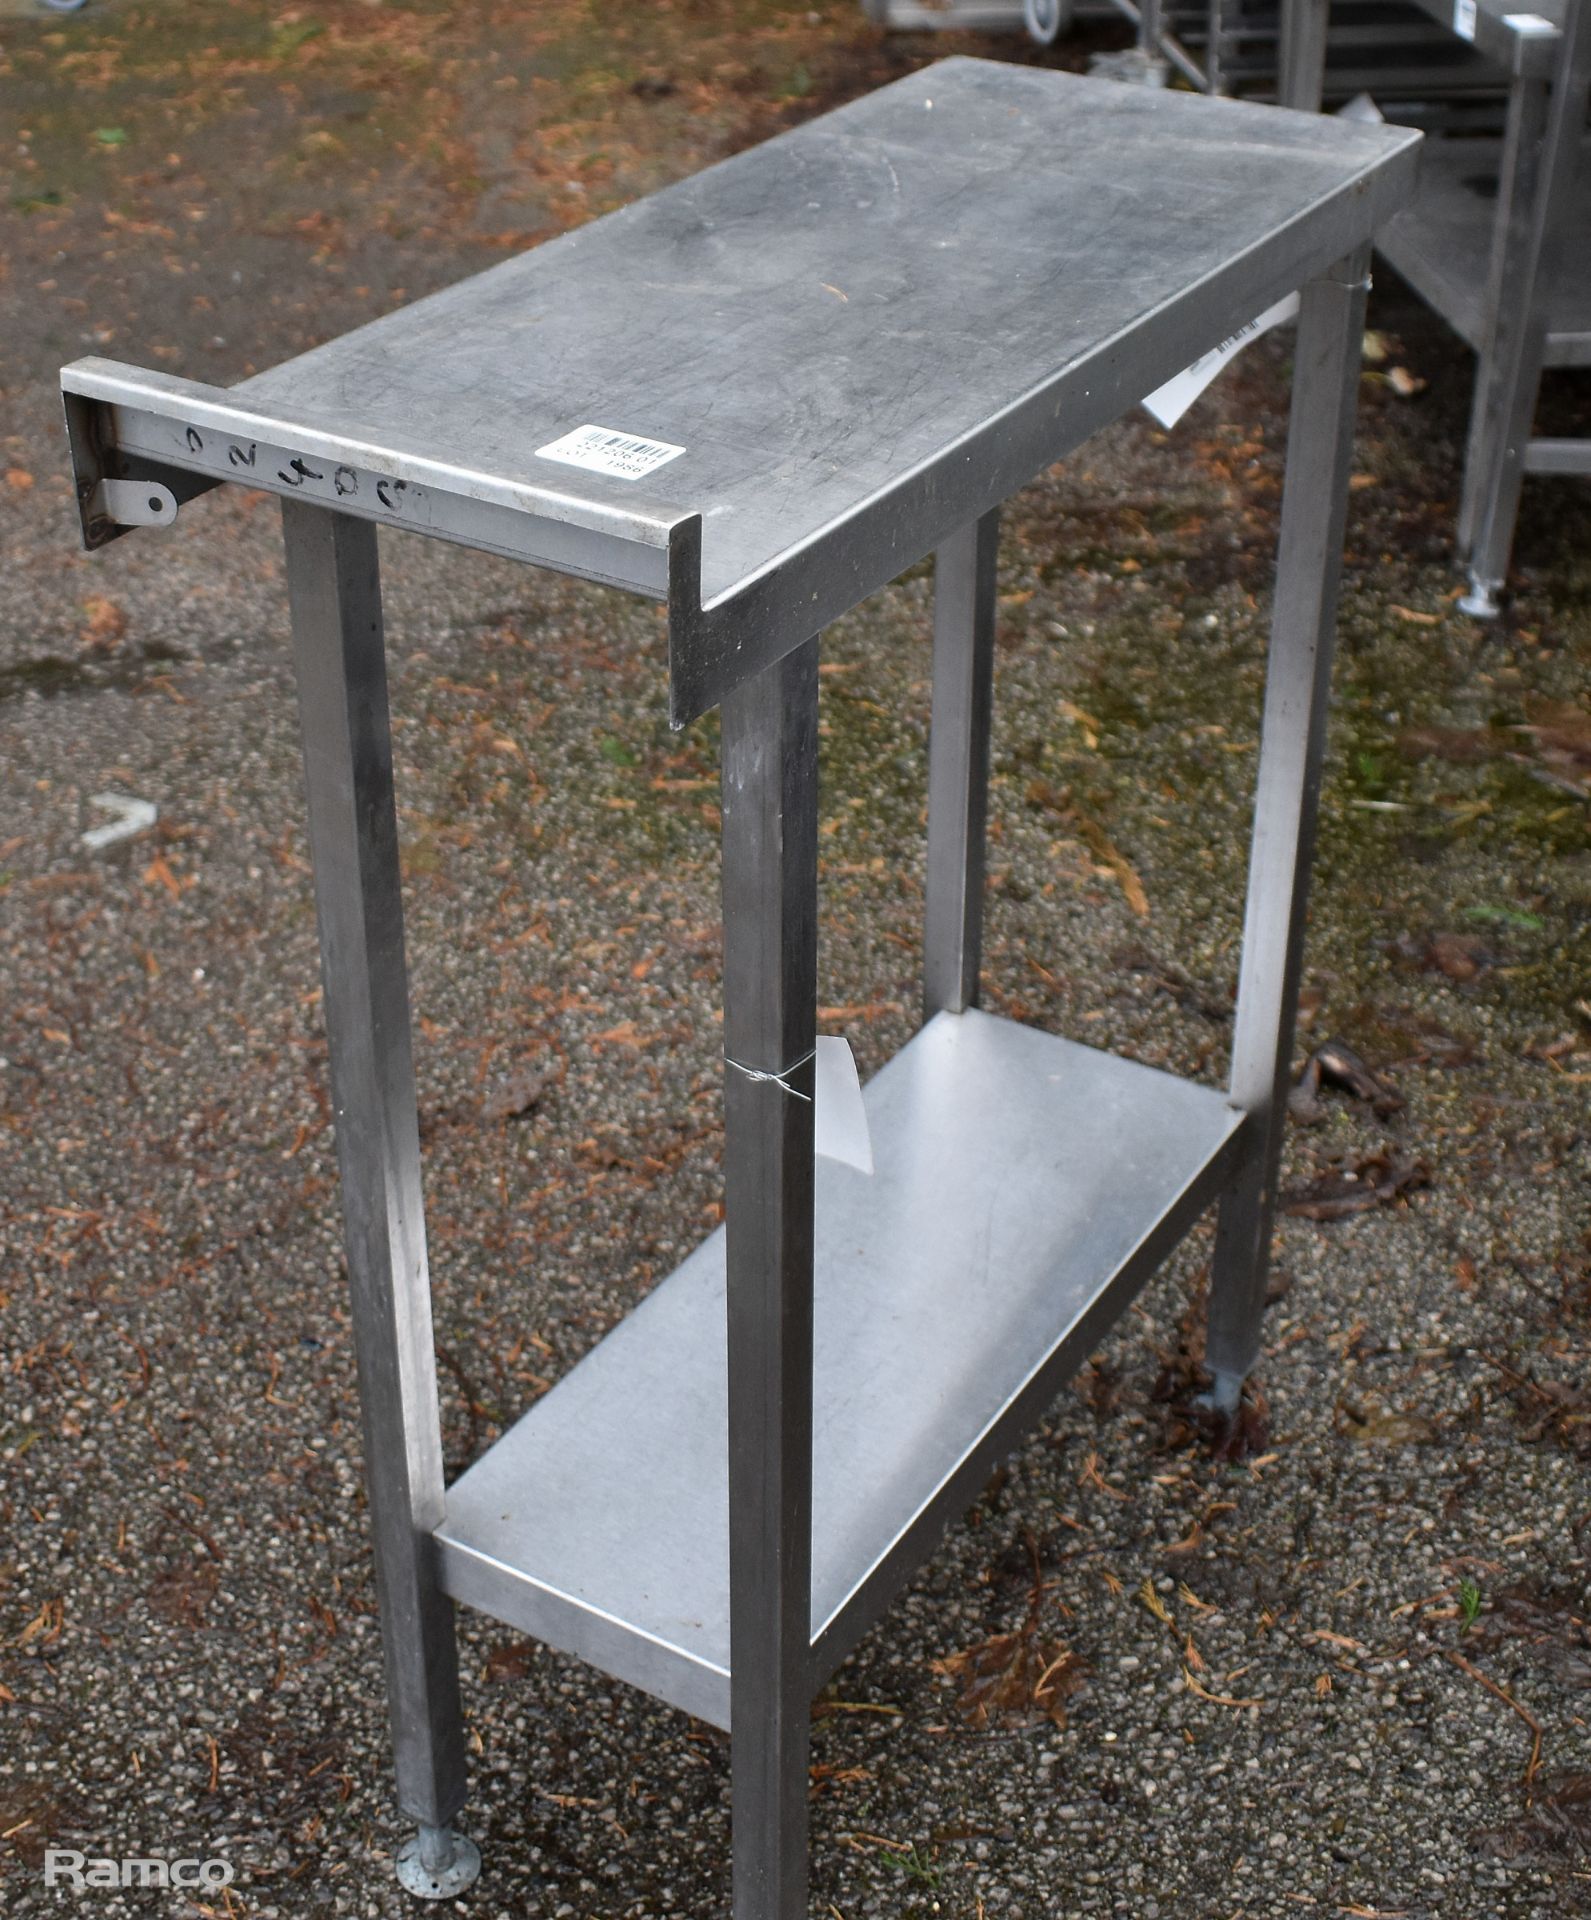 Stainless steel table - L300 x D750 x H960mm - Image 3 of 3